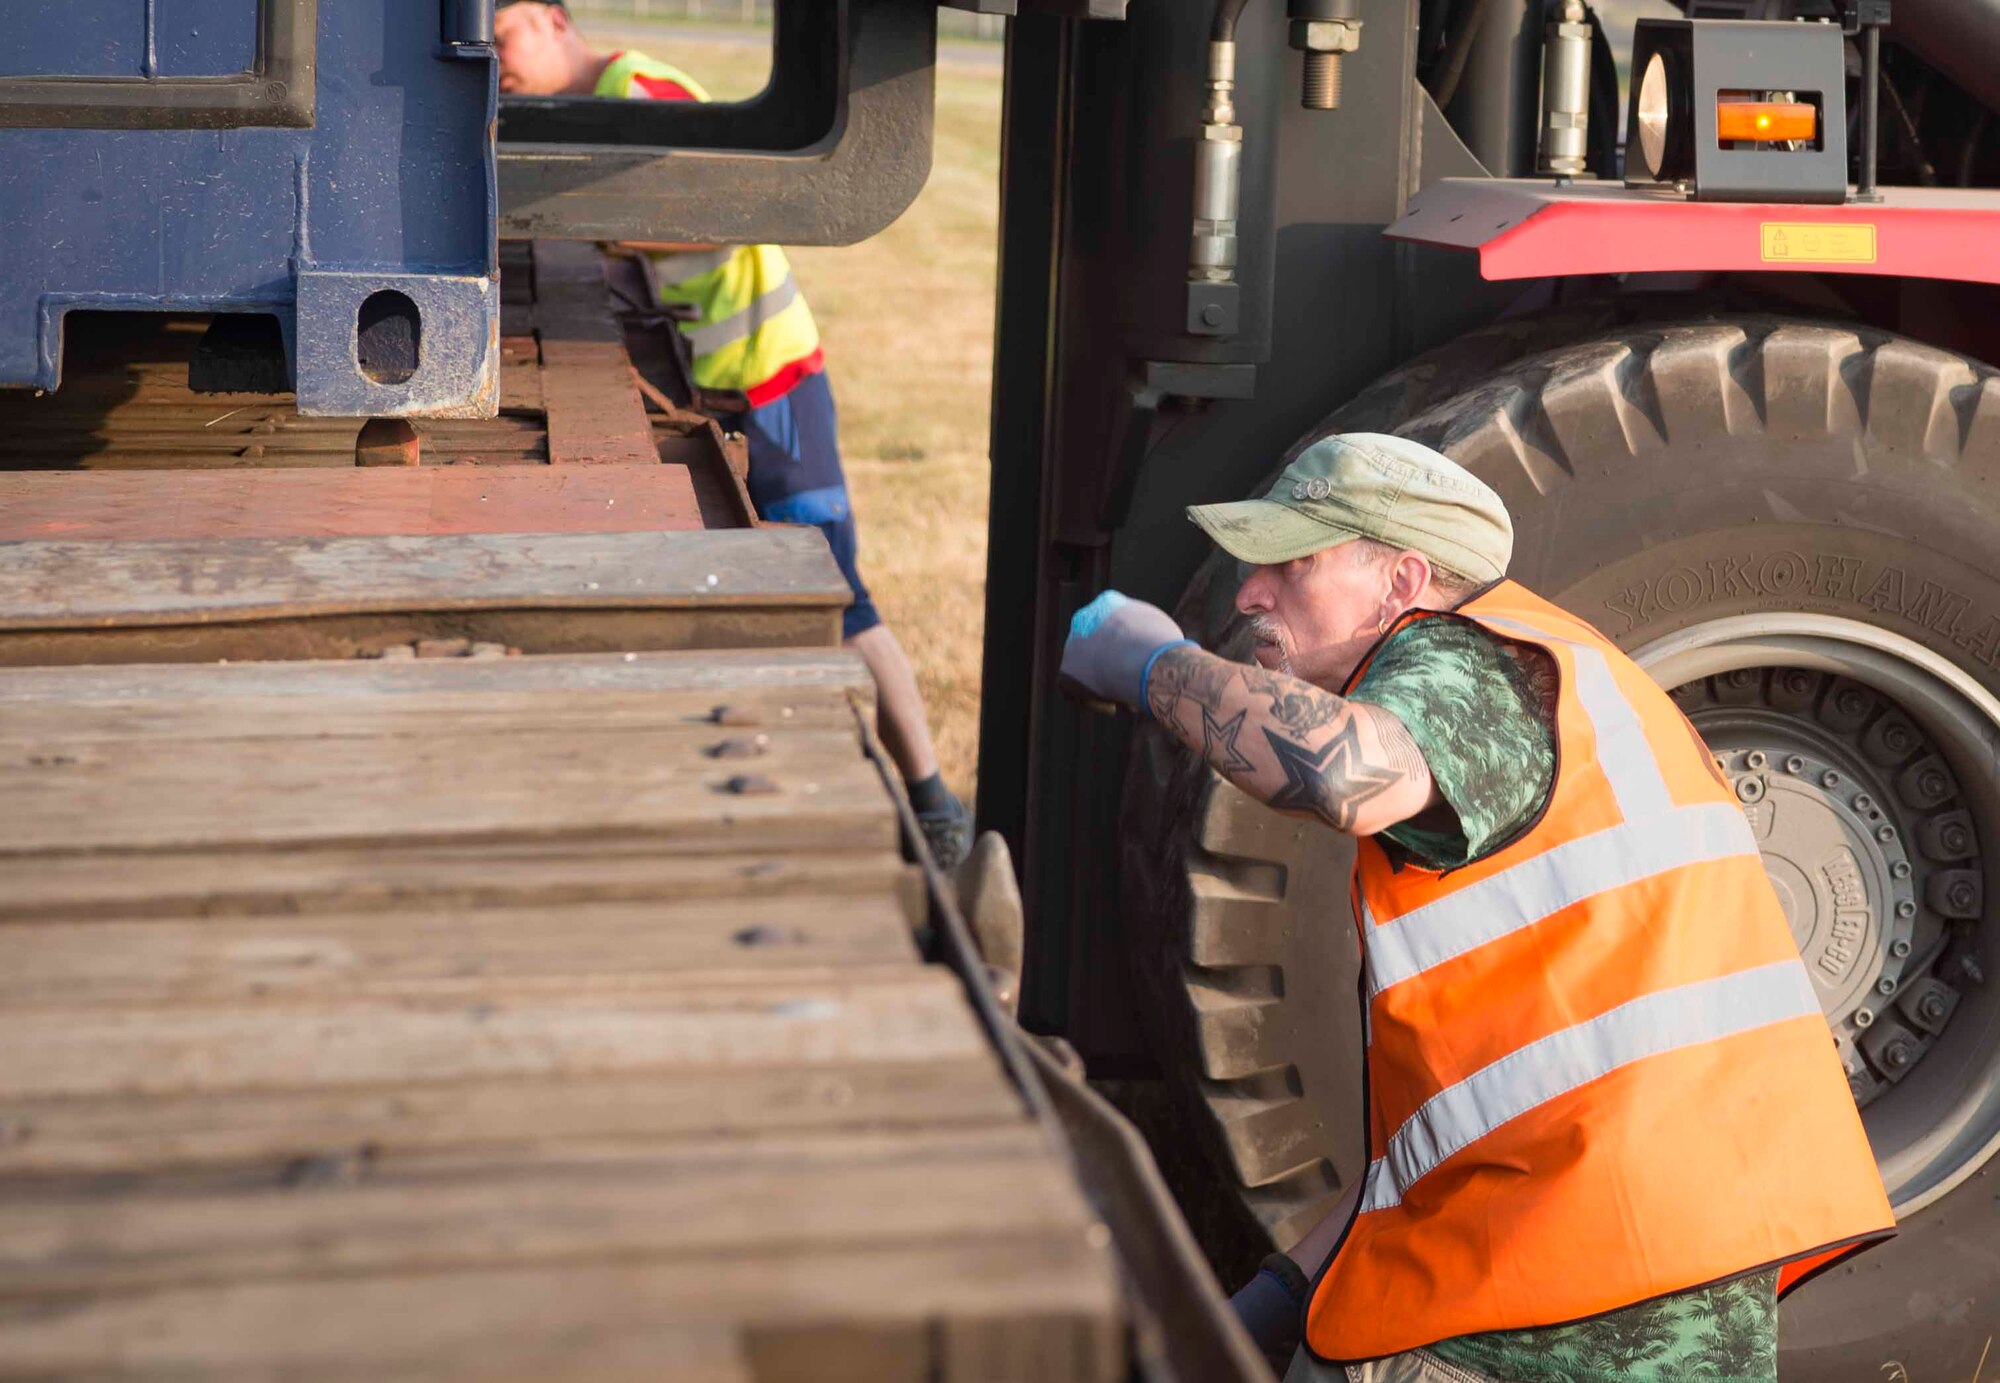 A Warehouse Service Agency employee directs a forklift operator to lower cargo onto a train car in Sanem, Luxembourg, July 23, 2018. The cargo travelled to Krzesiny Air Base, Poland, as part of a deployment exercise to test the U.S. military's ability to rapidly process, deploy, and set up facilities, equipment, and vehicles in a location where little infrastructure exists. This was the first time in more than 25 years that the U.S. military has used a railway to transport equipment. (U.S. Air Force photo by Senior Airman Elizabeth Baker)